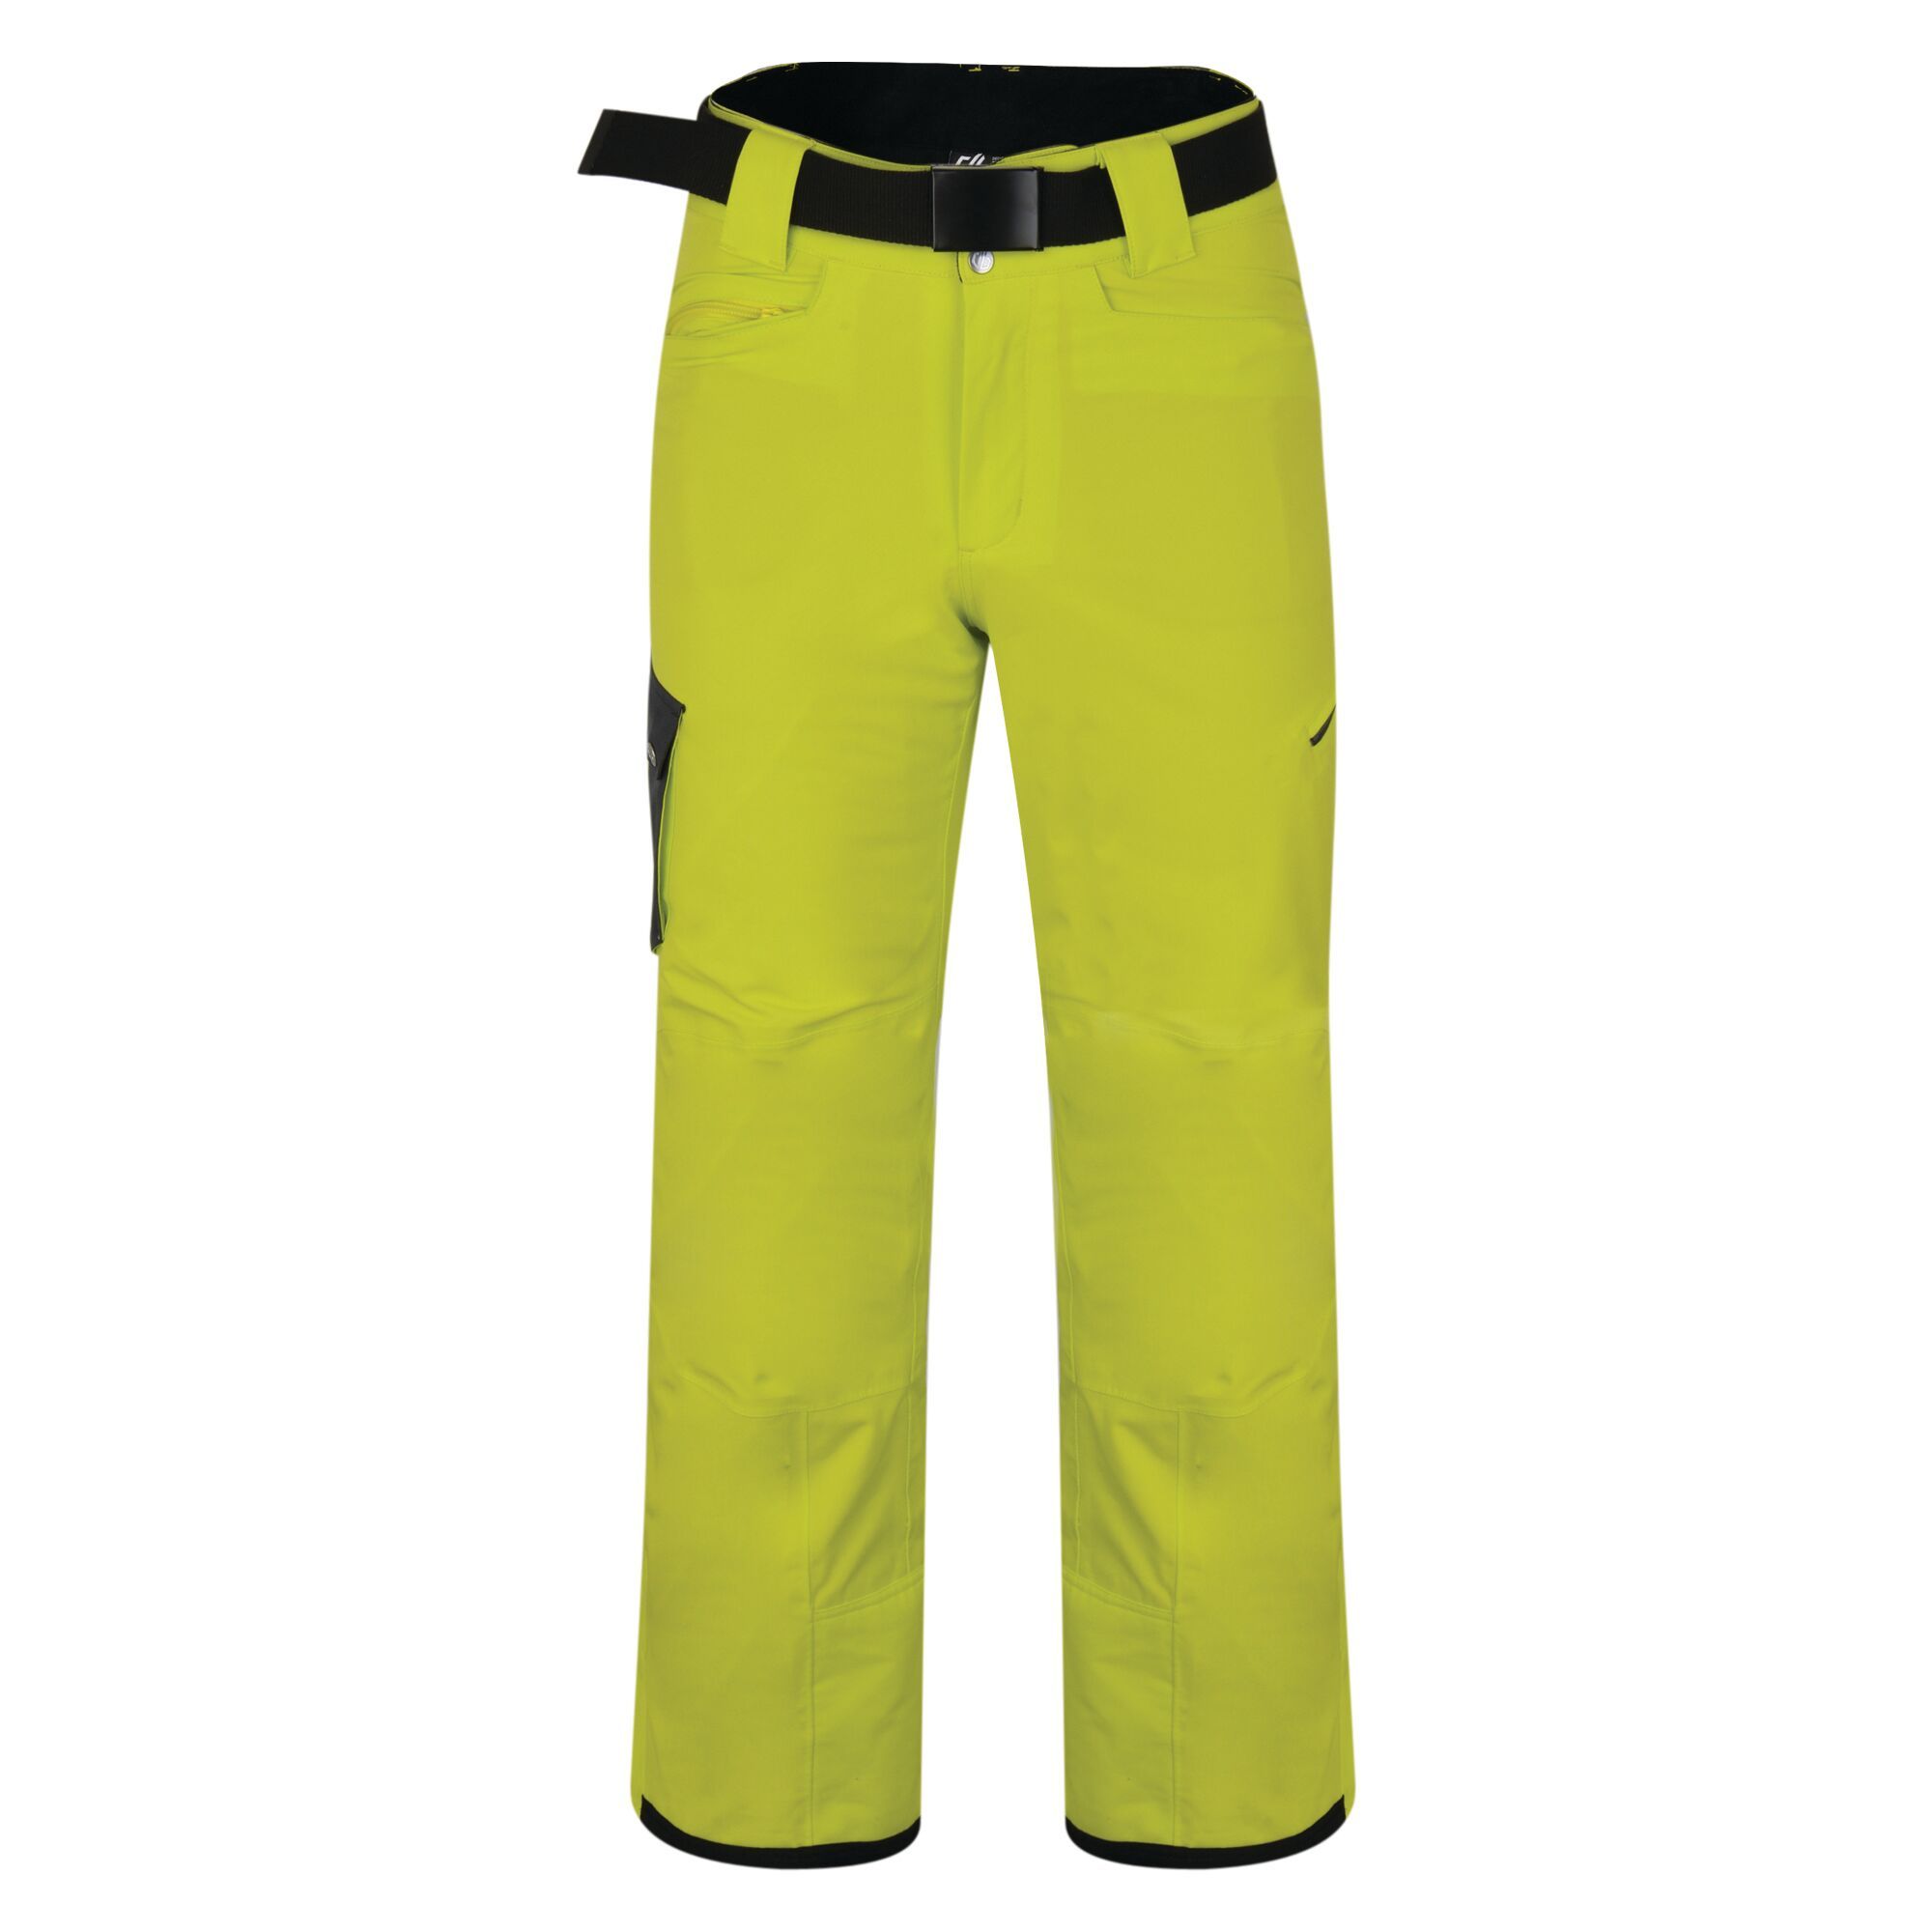 Material: polyester: 100%. Waterproof and breathable Ared V02 20000 polyester 4-way stretch fabric. Durable water repellent finish. Taped seams. High loft polyester insulation. Warm touch lining to upper legs. Waist belt with metal buckle fastener. Multiple pockets including zipped pockets. Articulated knee design. Reinforced self fabric overlay at inner ankle. Zip gusset at hem. Reinforced binding at hem. Tab up hem. Integral snow gaiters.